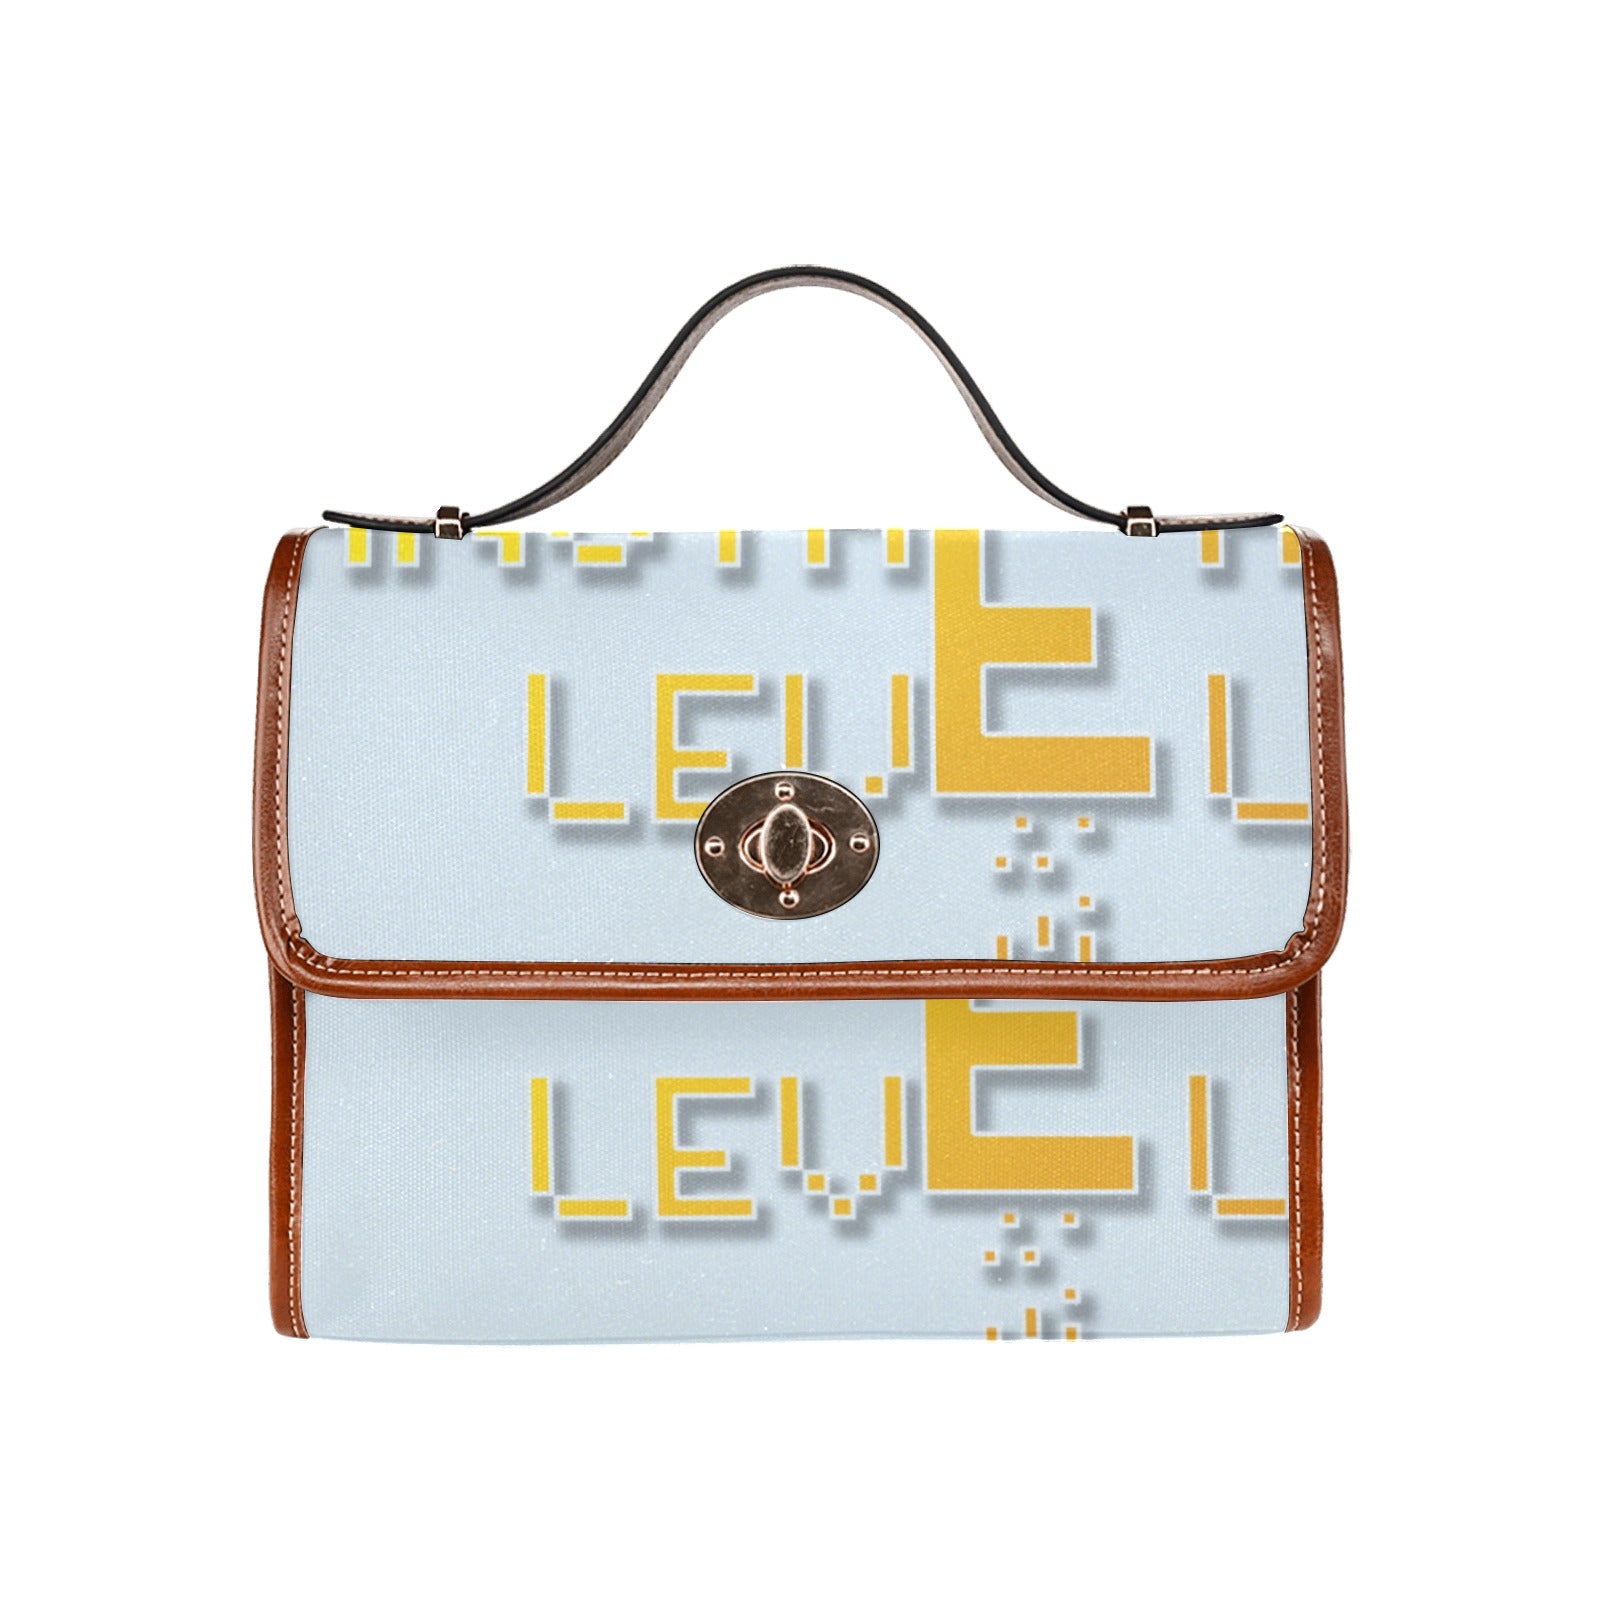 fz yellow levels handbag one size / fz - levels bag-blue all over print waterproof canvas bag(model1641)(brown strap)